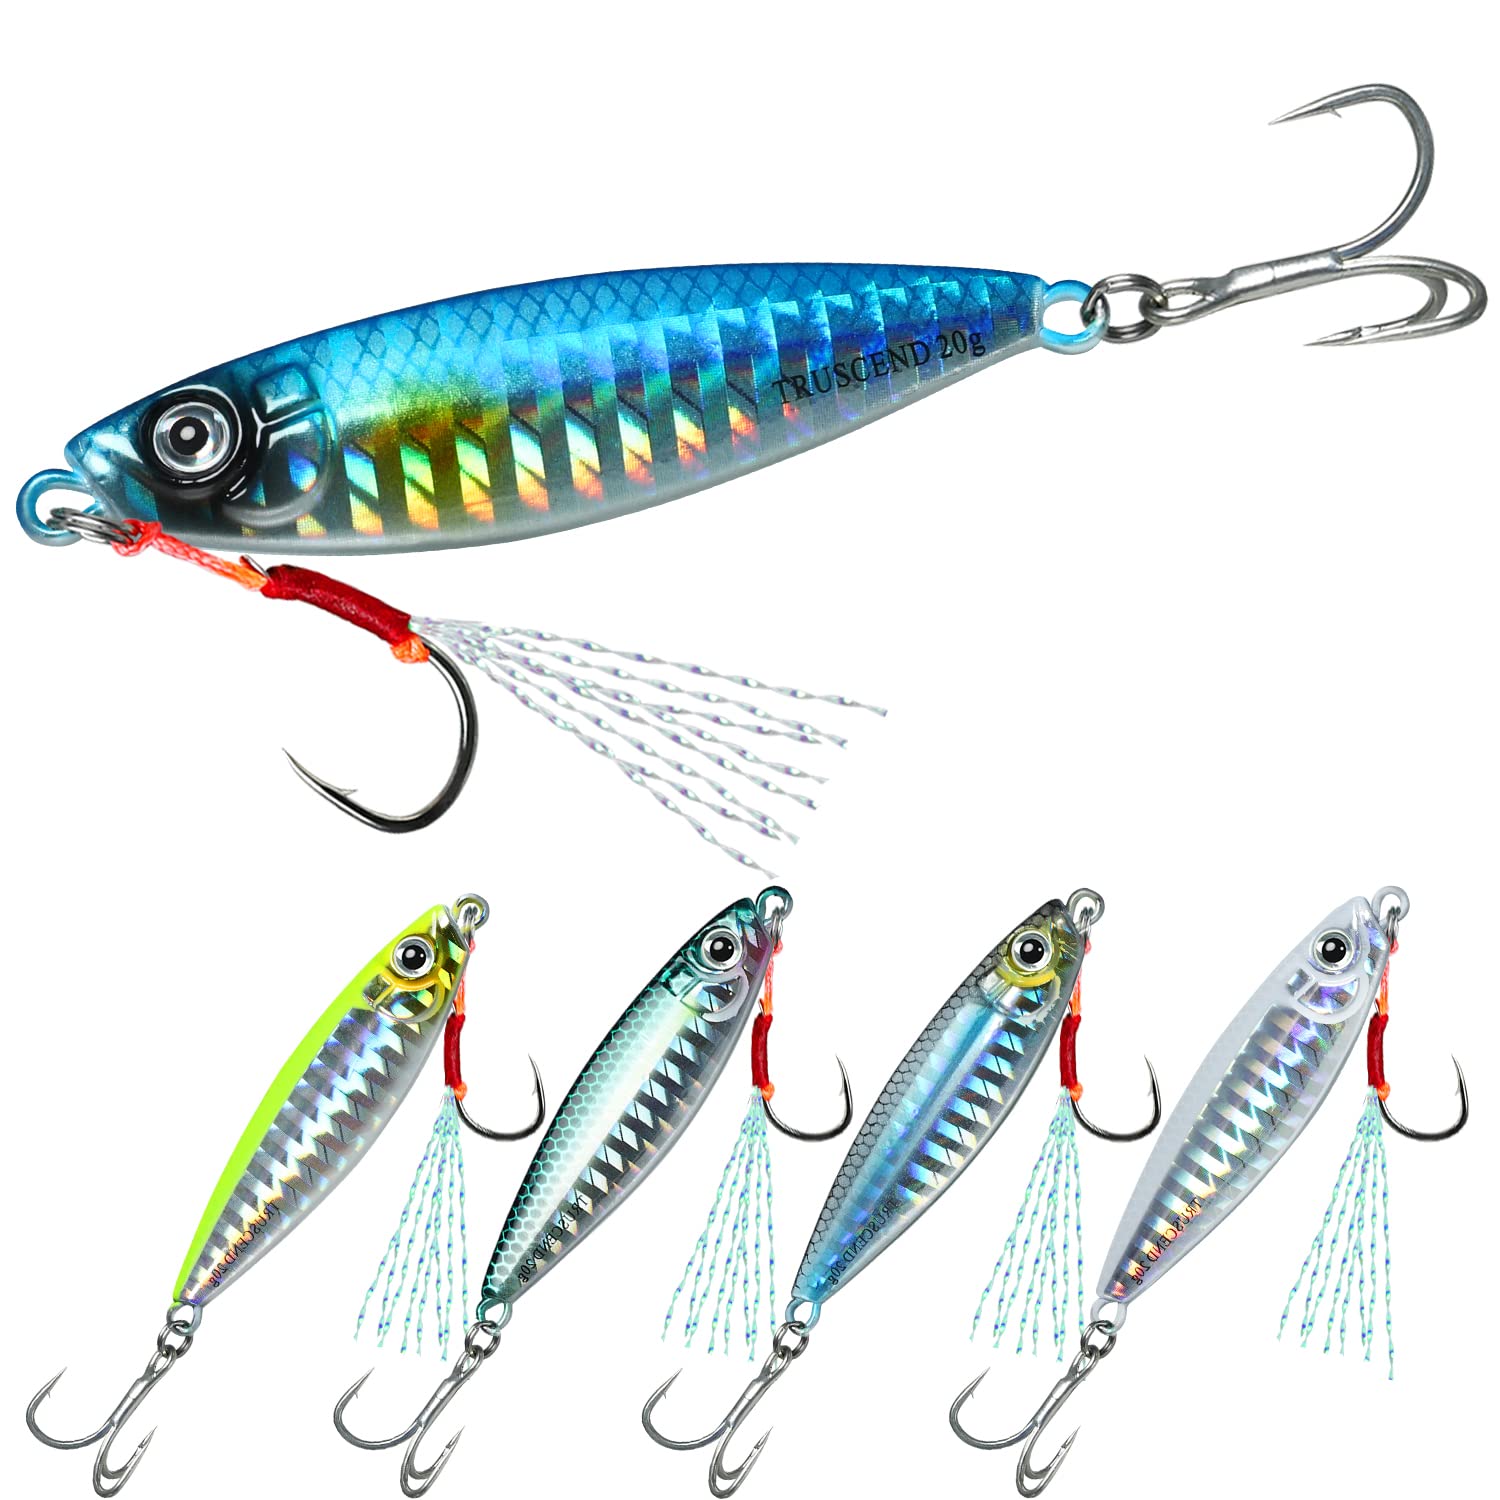 TRUSCEND Fishing Lures Diving Lip Design Suspending Jointed Crankbait with  BKK Hooks All-Purpose Trolling Glide Bait for Freshwater & Saltwater  Inshore Fishing Swimbaits for Bass Tout Walleye Crappie